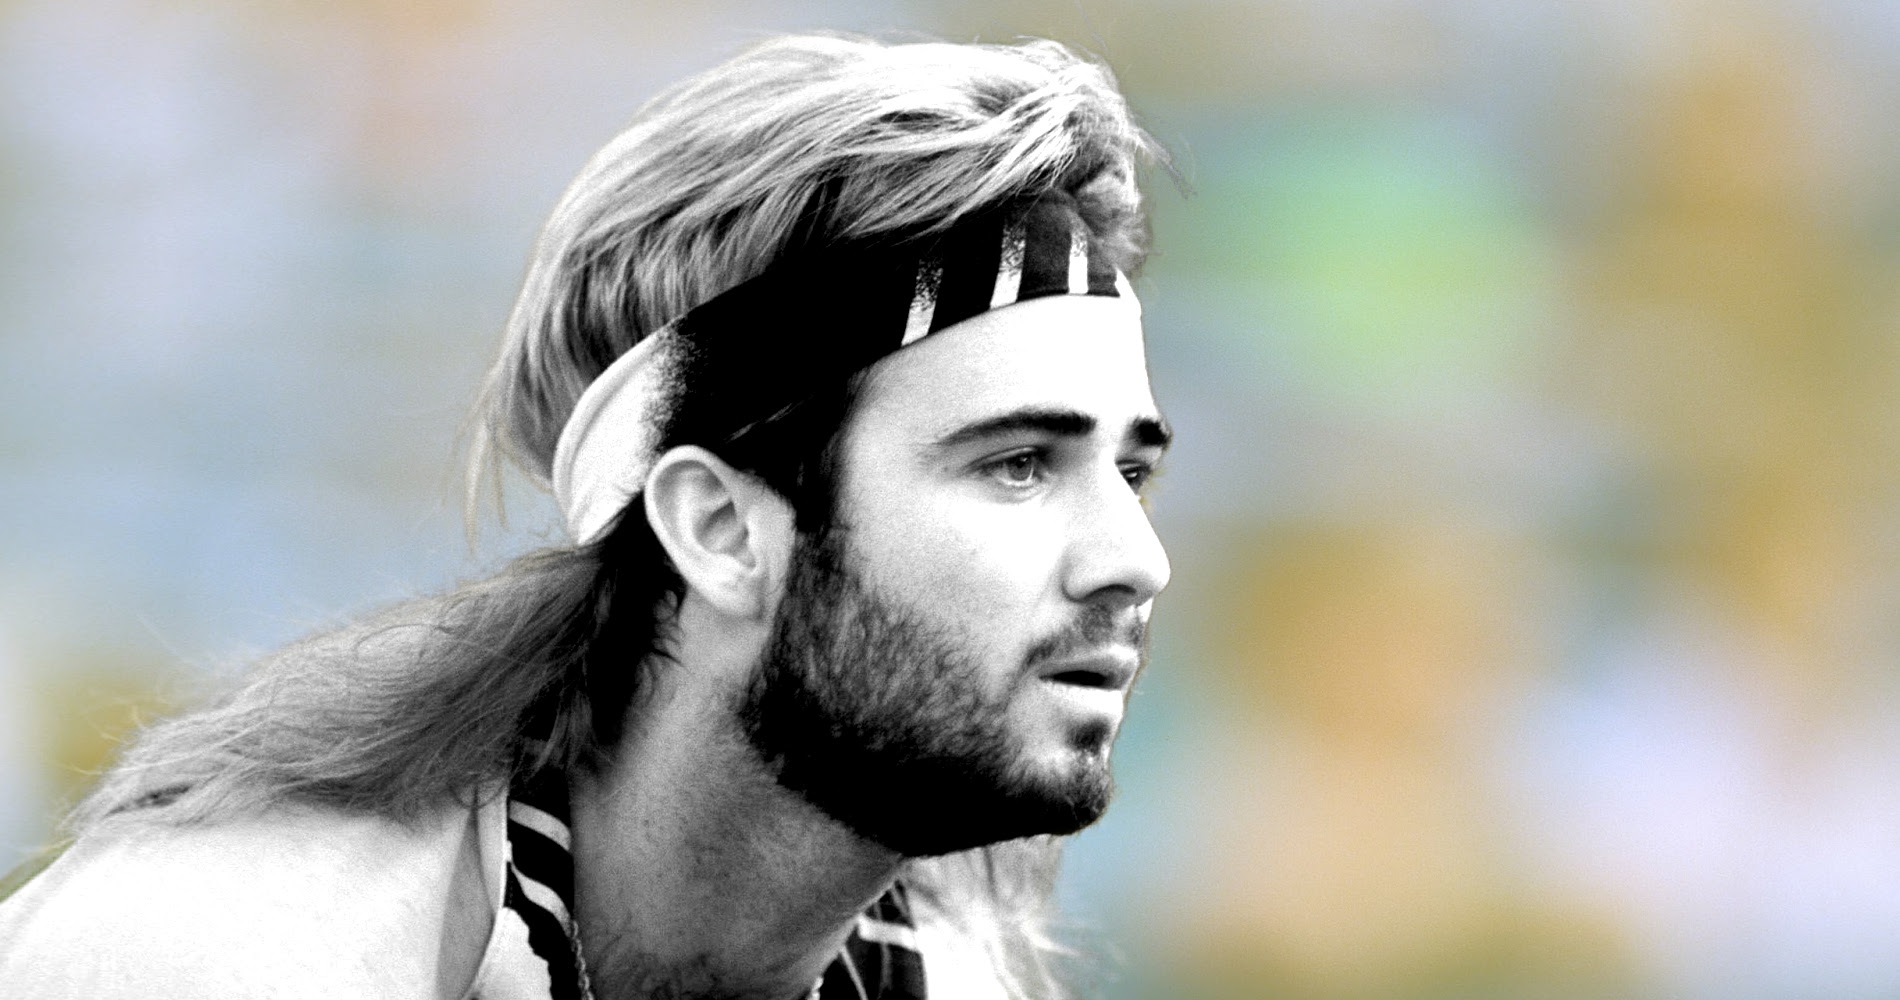 Andre Agassi, On This Day, 24 mars